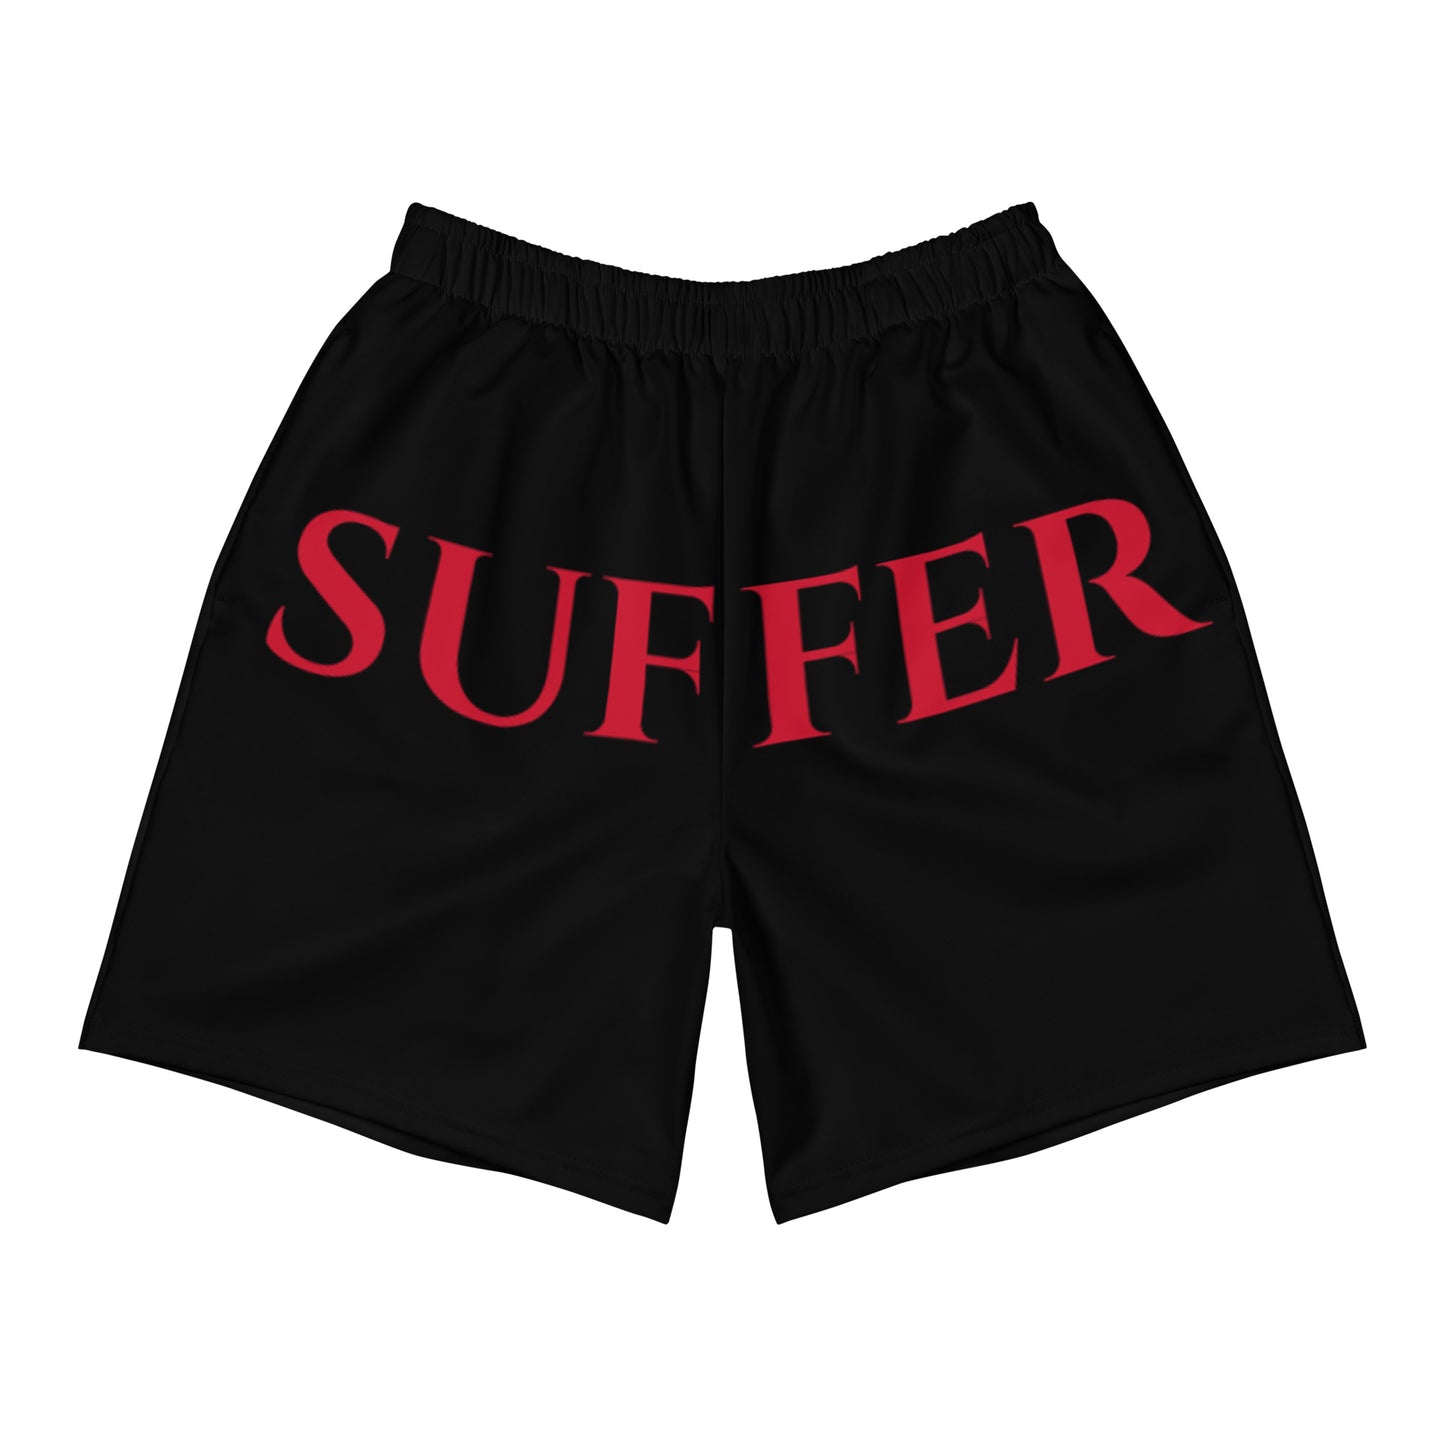 Blk/Red Hip Suffer Athletic Shorts